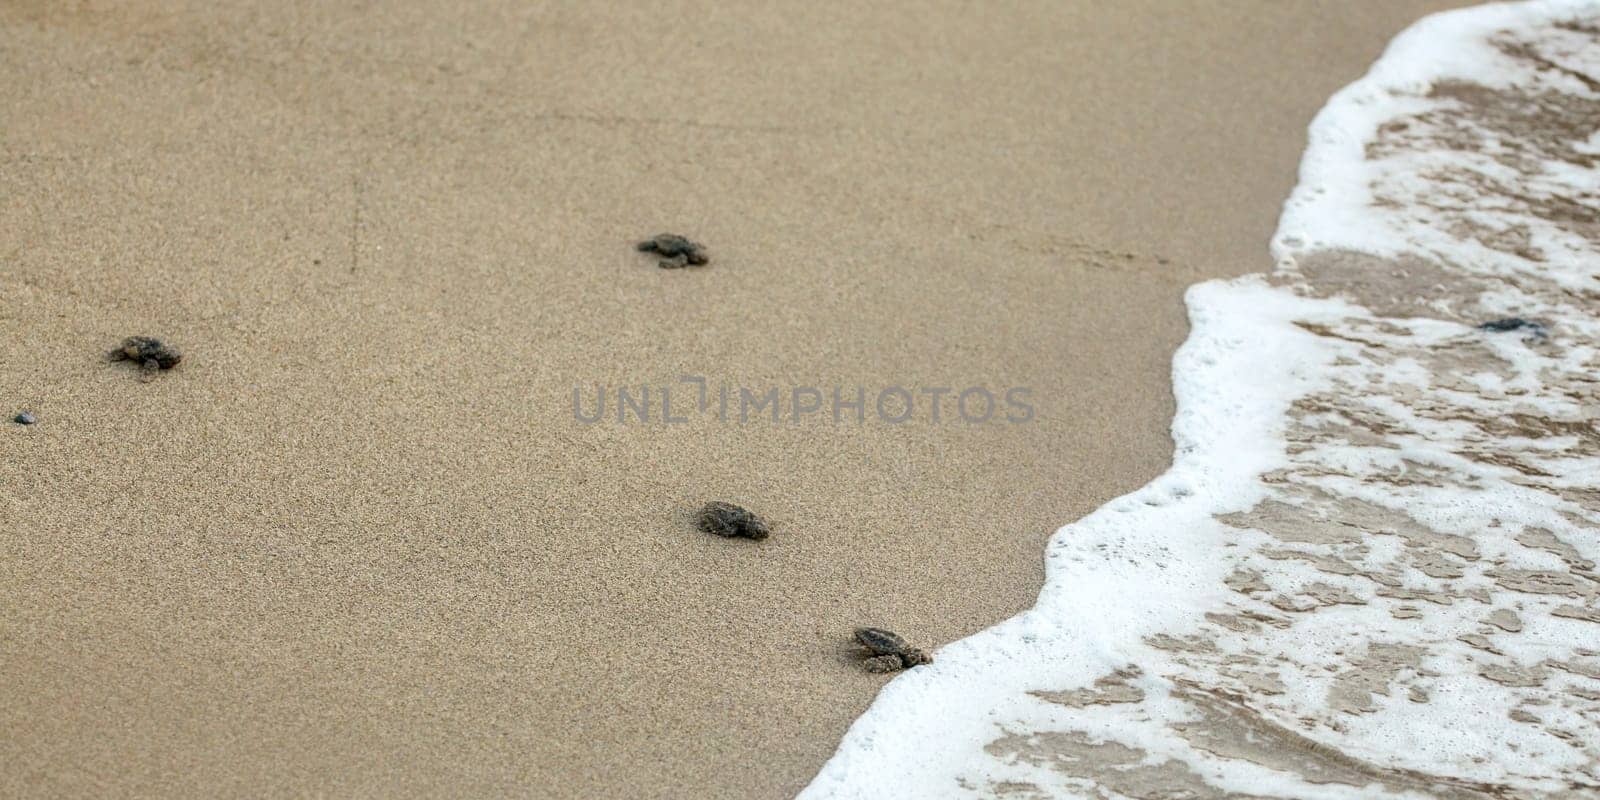 Baby turtles, just hatched from eggs, walking on sand trying to get into sea